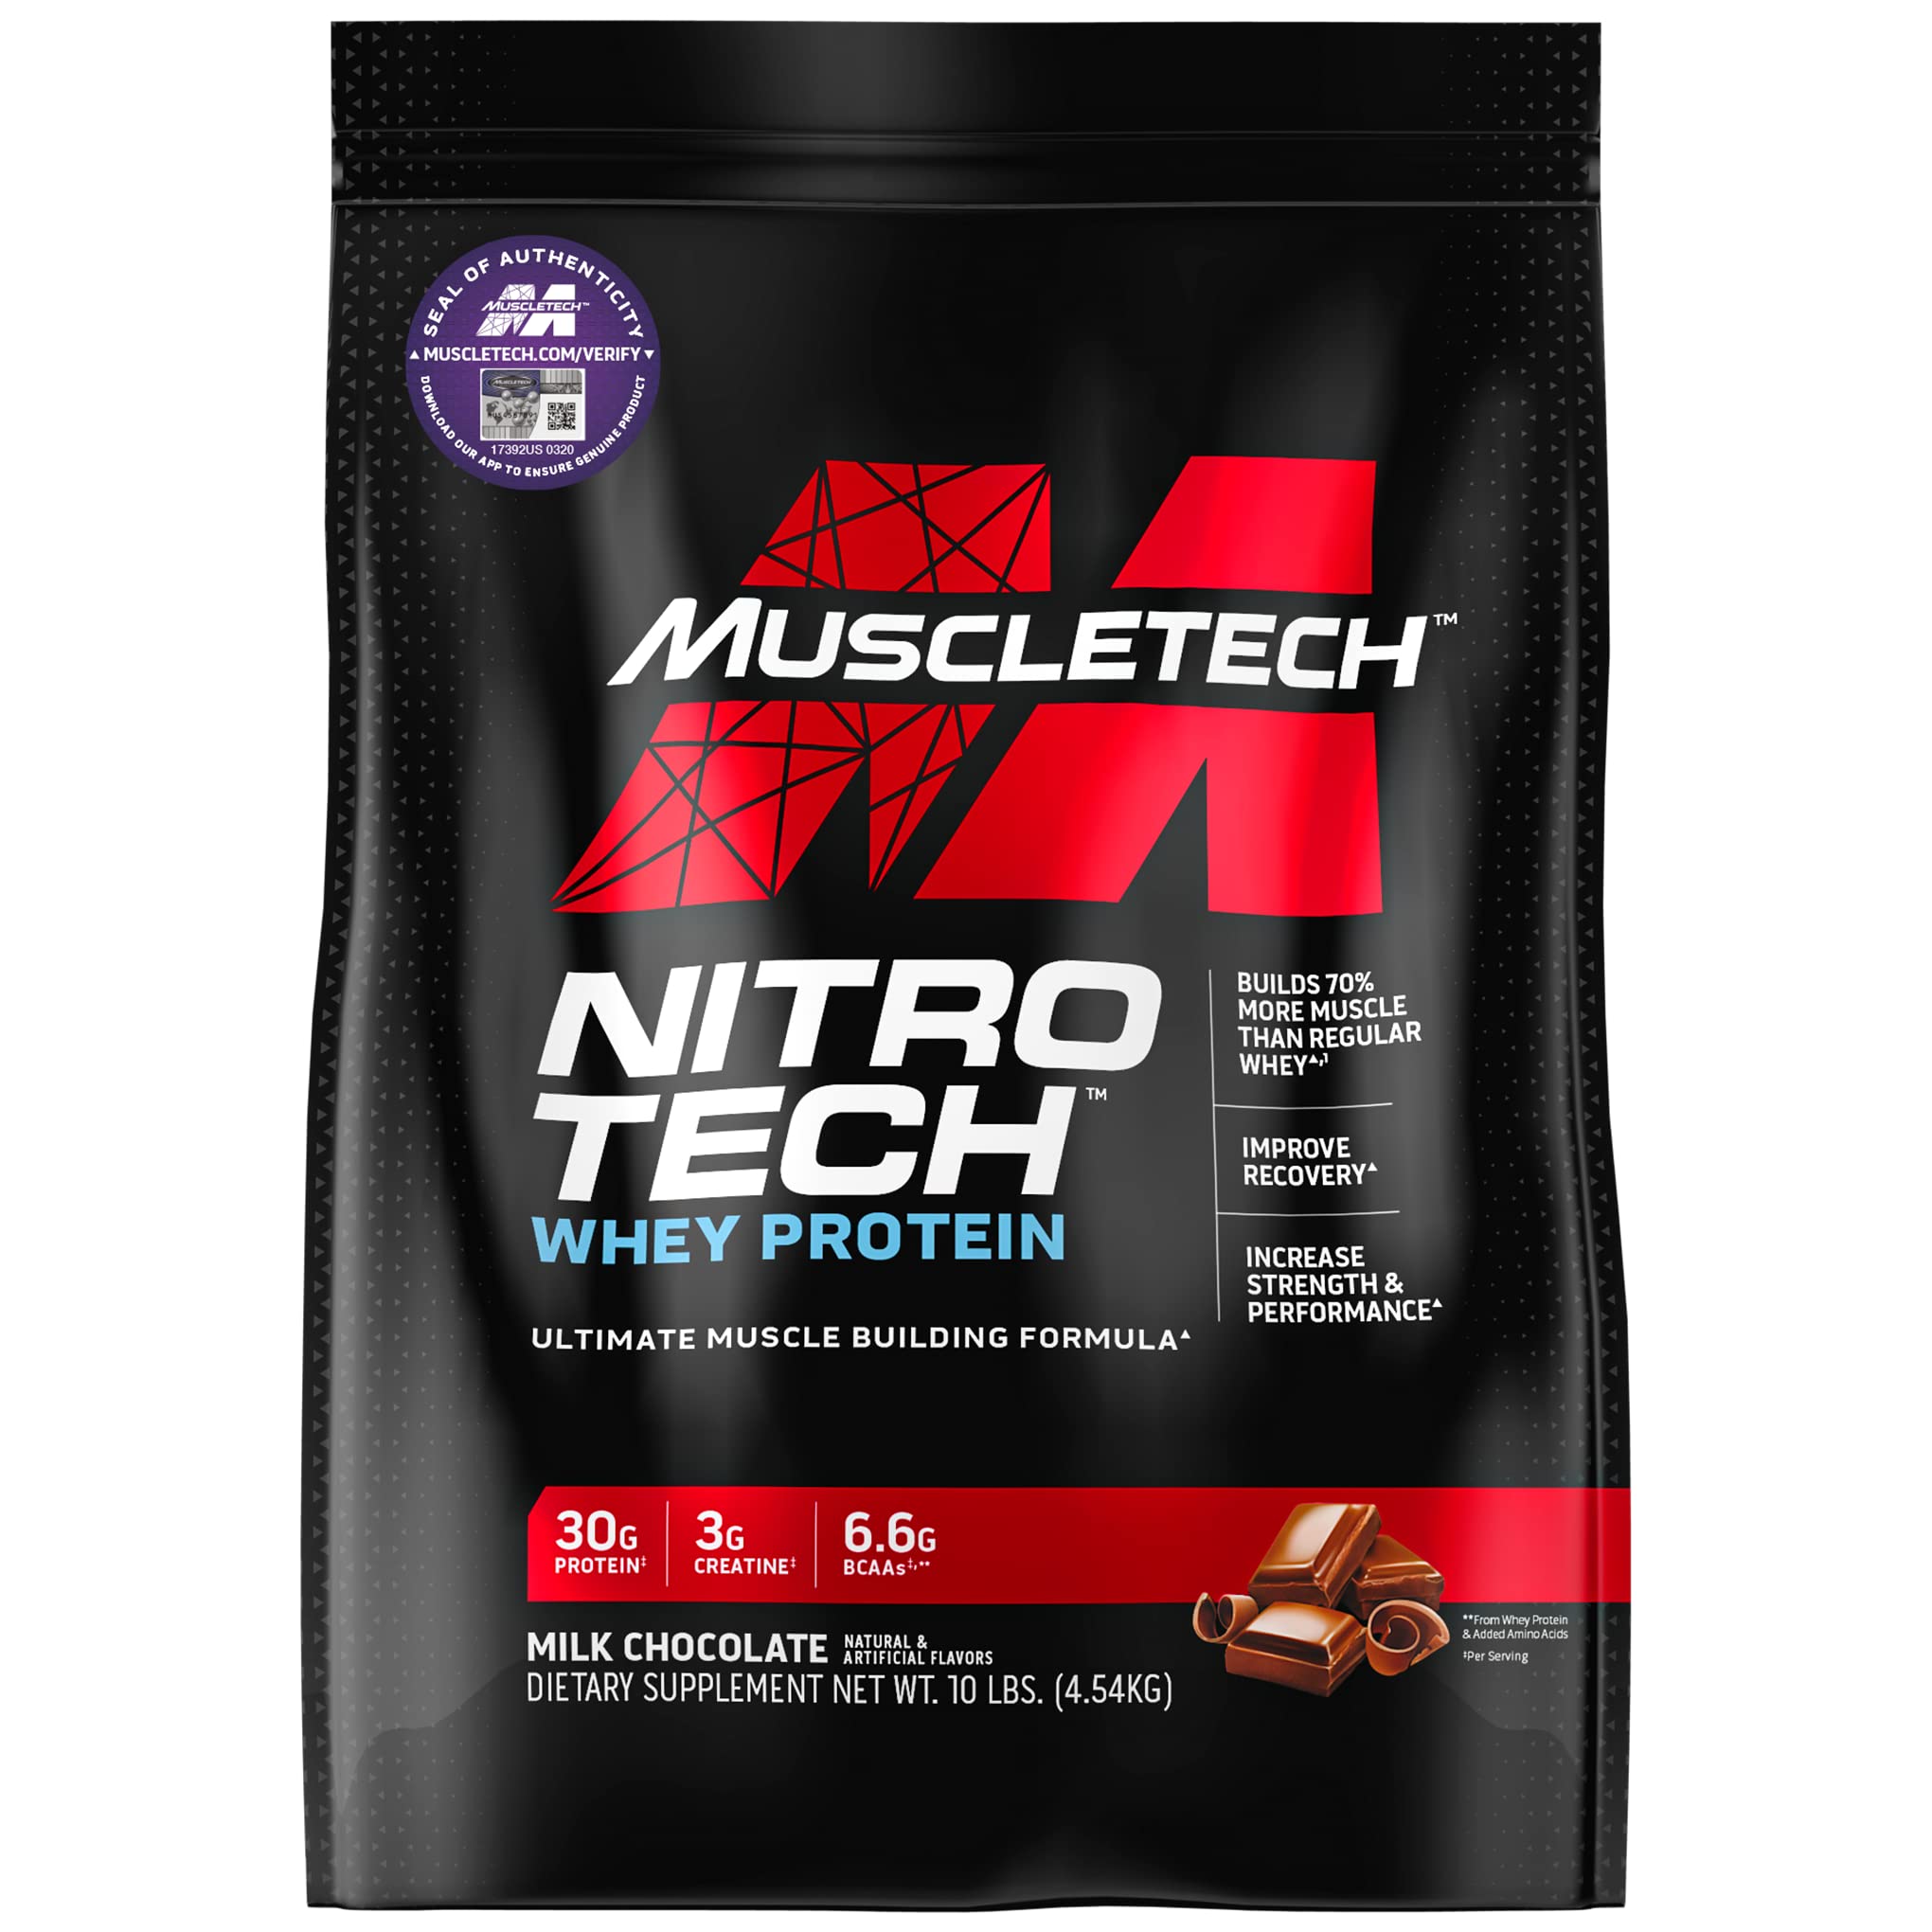 10-Lb MuscleTech Nitro-Tech Whey Protein Powder (Milk Chocolate, 100 Servings) $72.02 ($0.72/Scoop) w/ S&S + Free Shipping